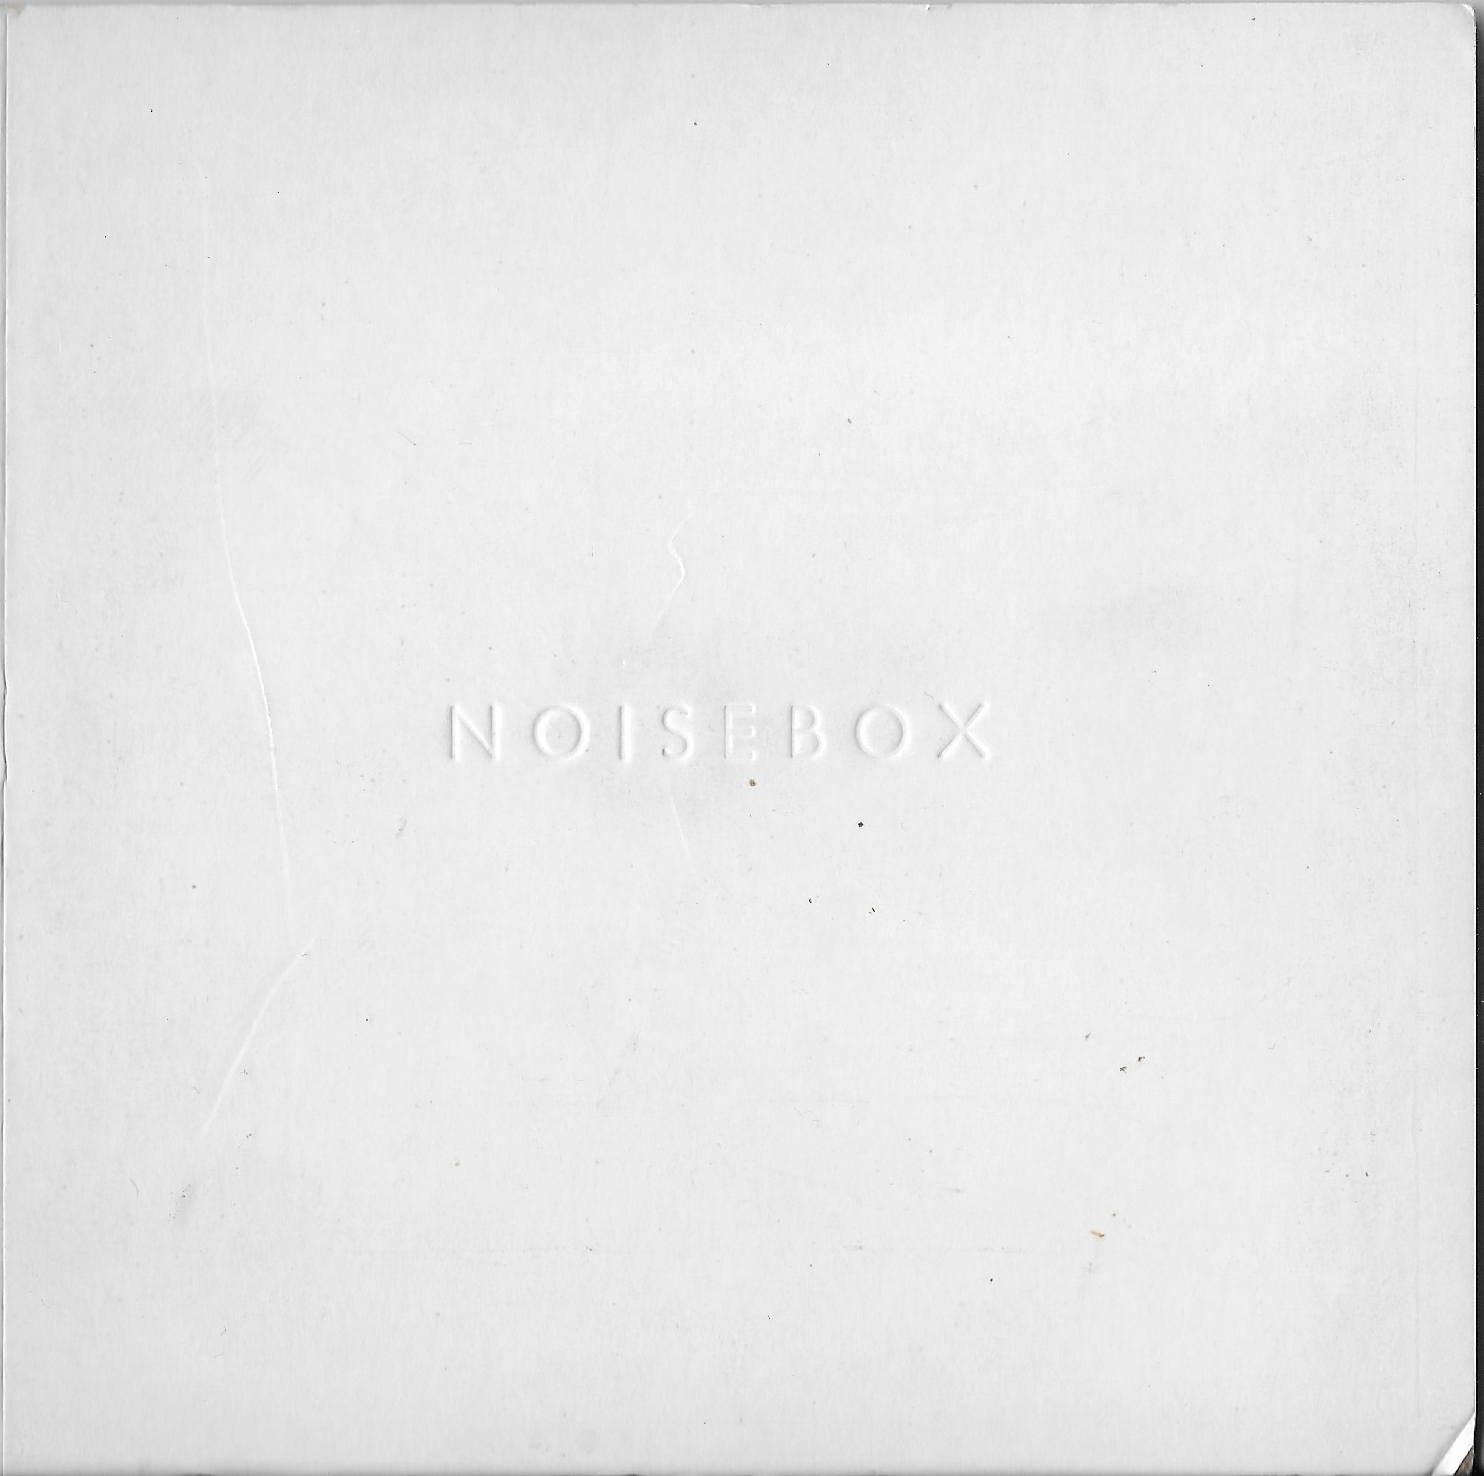 Picture of NBX 018 Now that's what I call Noisebox by artist Various 